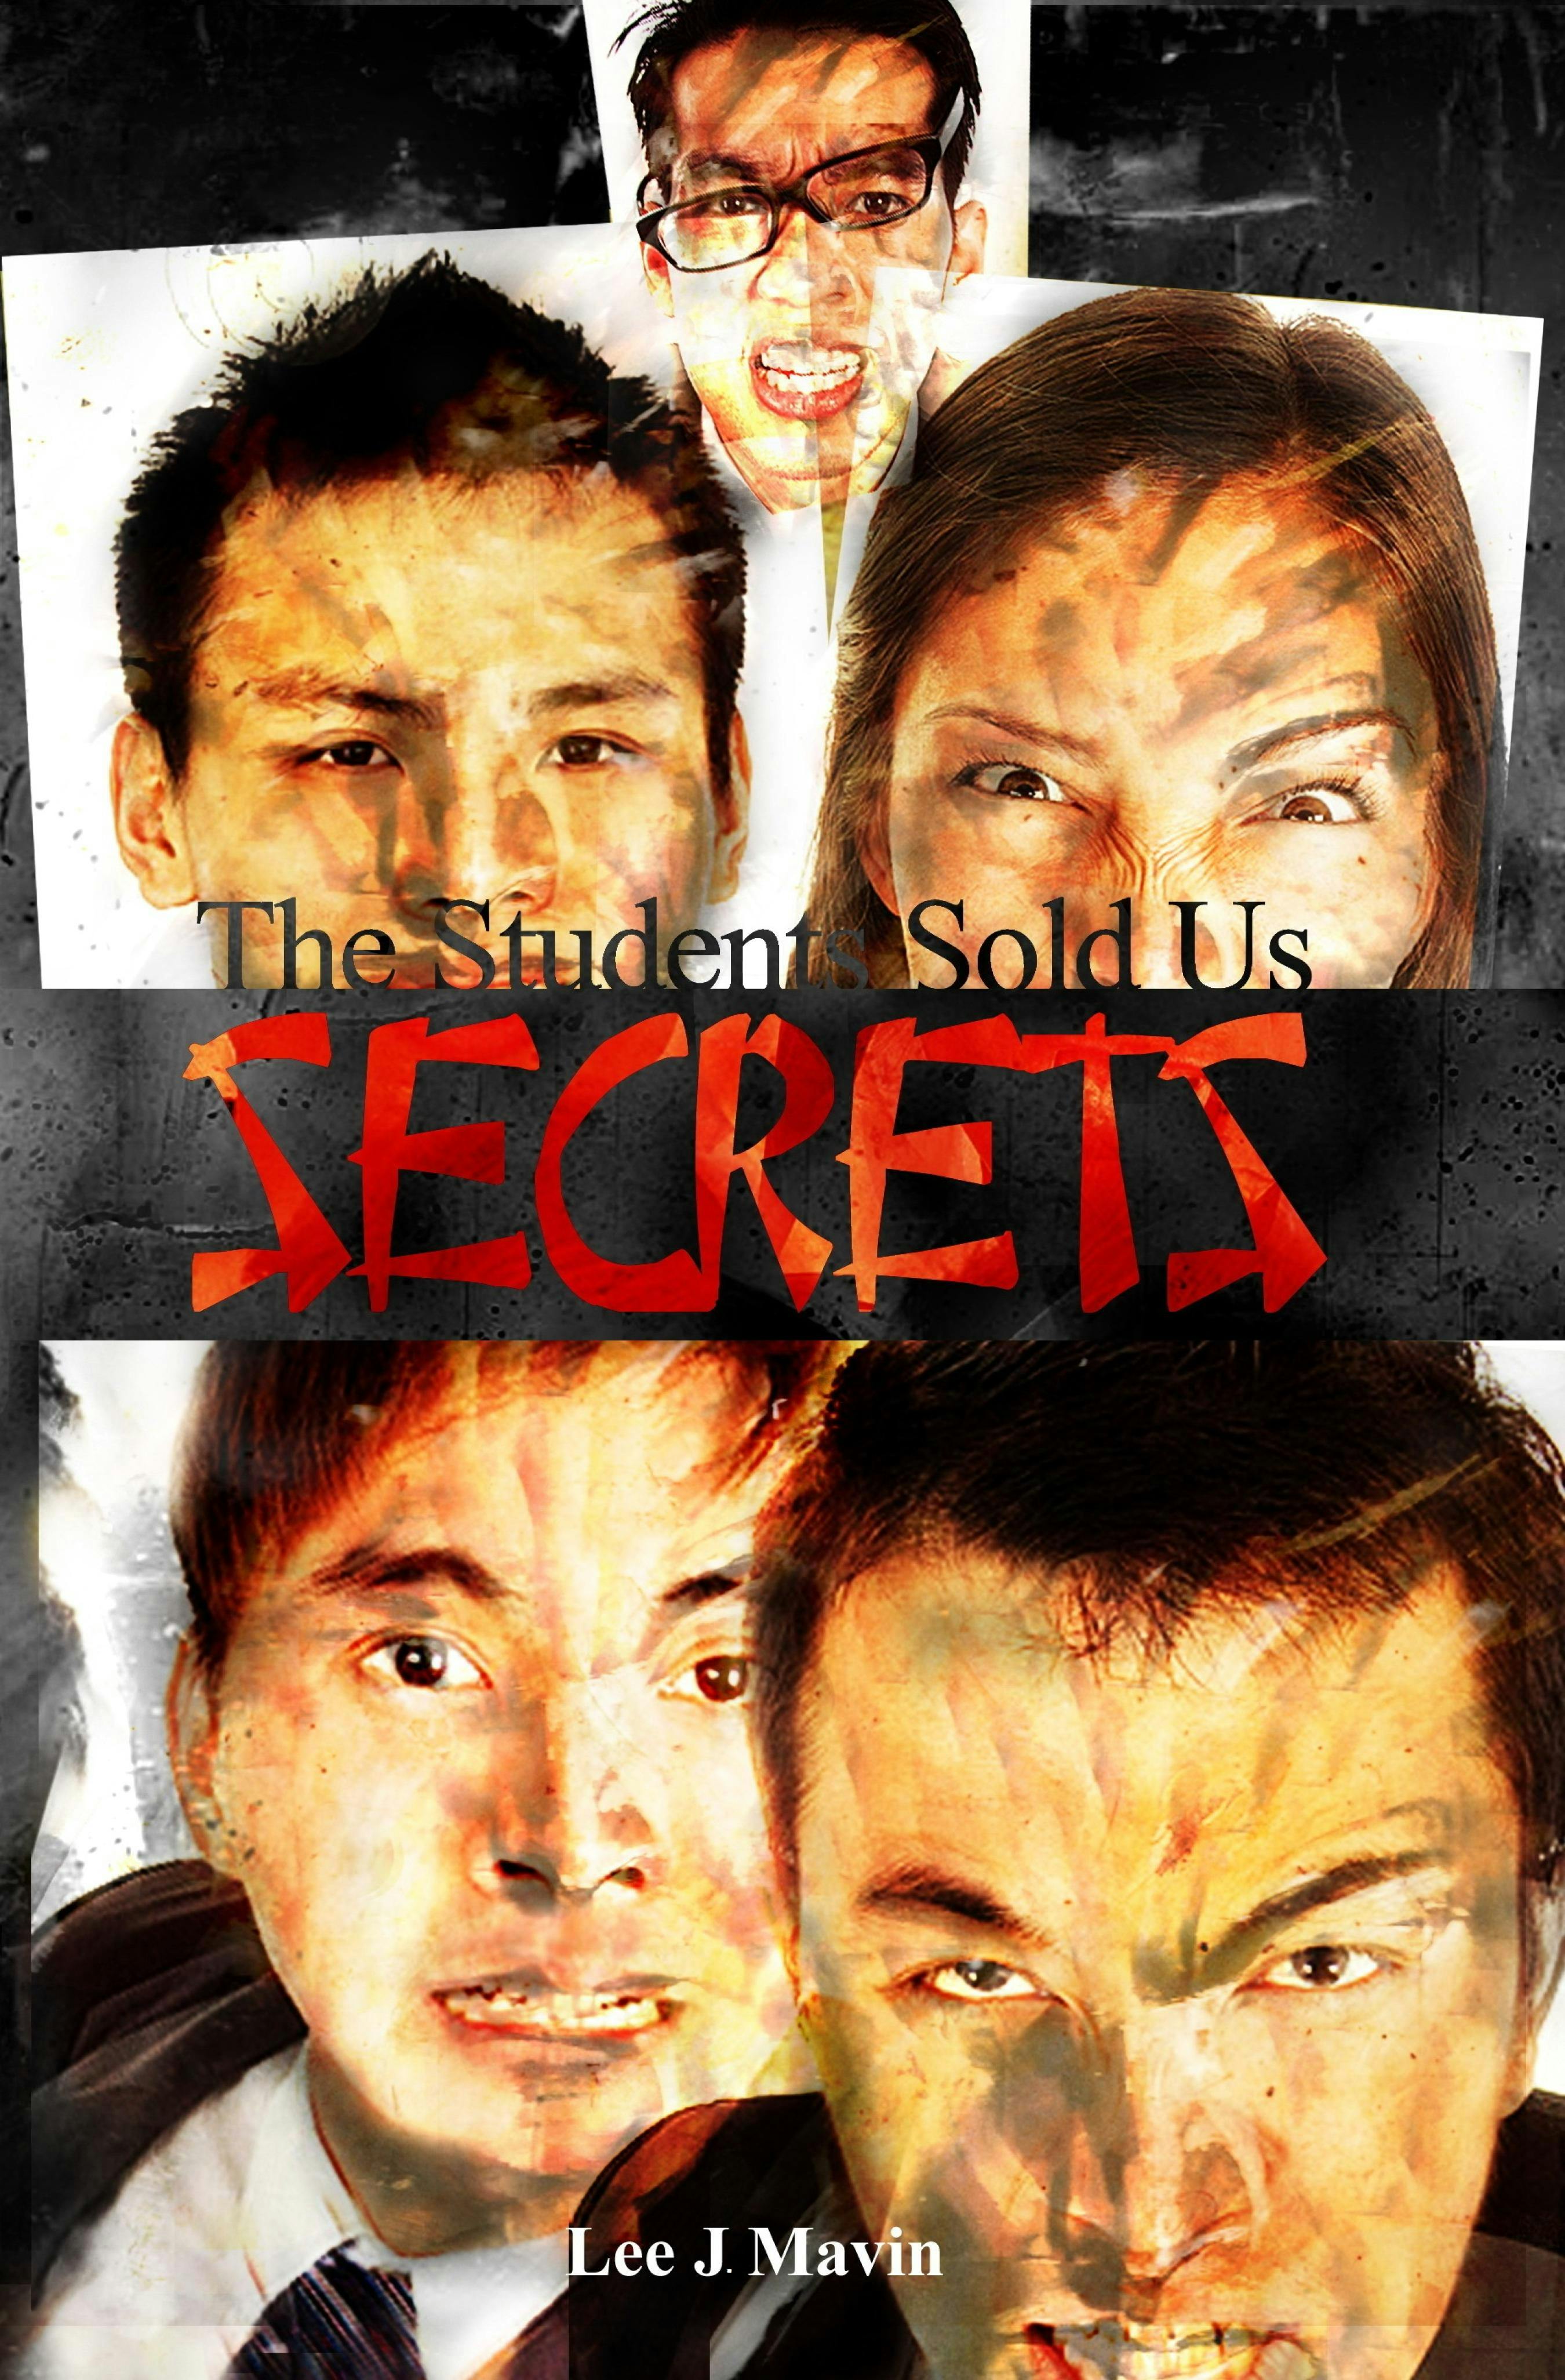 The Students Sold Us Secrets - undefined